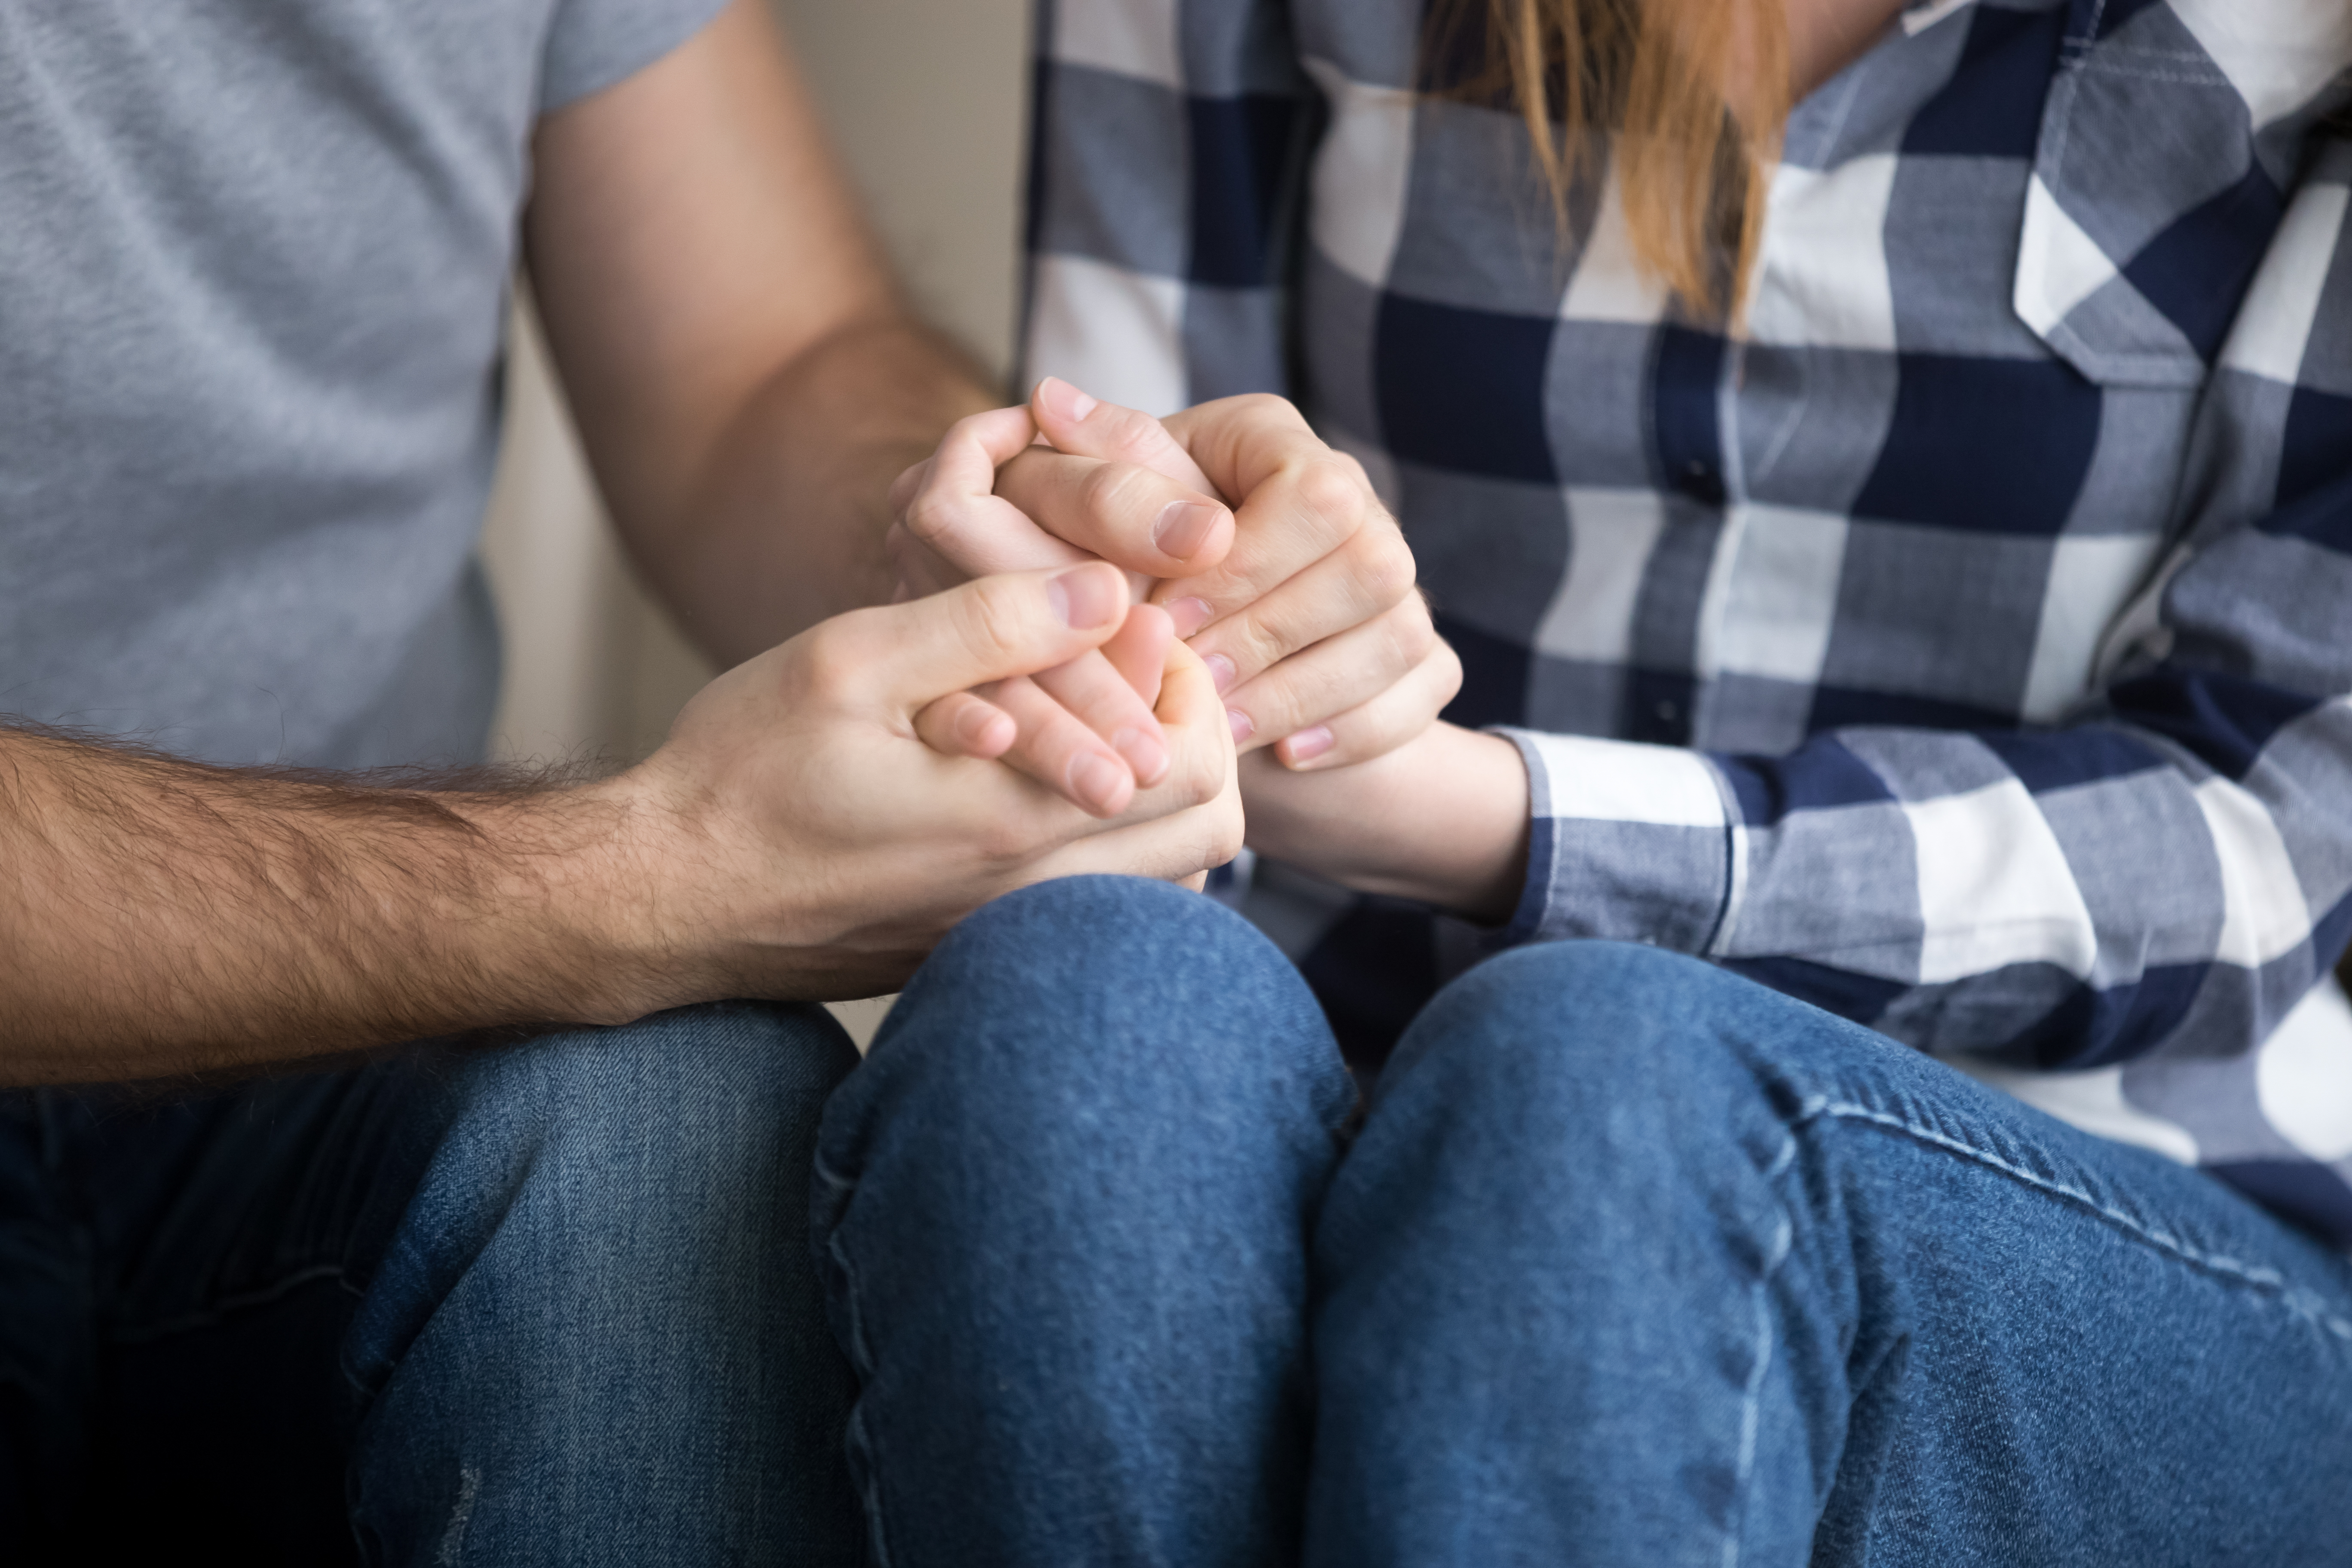 Married couple holding hands giving psychological support, close up view | Source: Getty Images